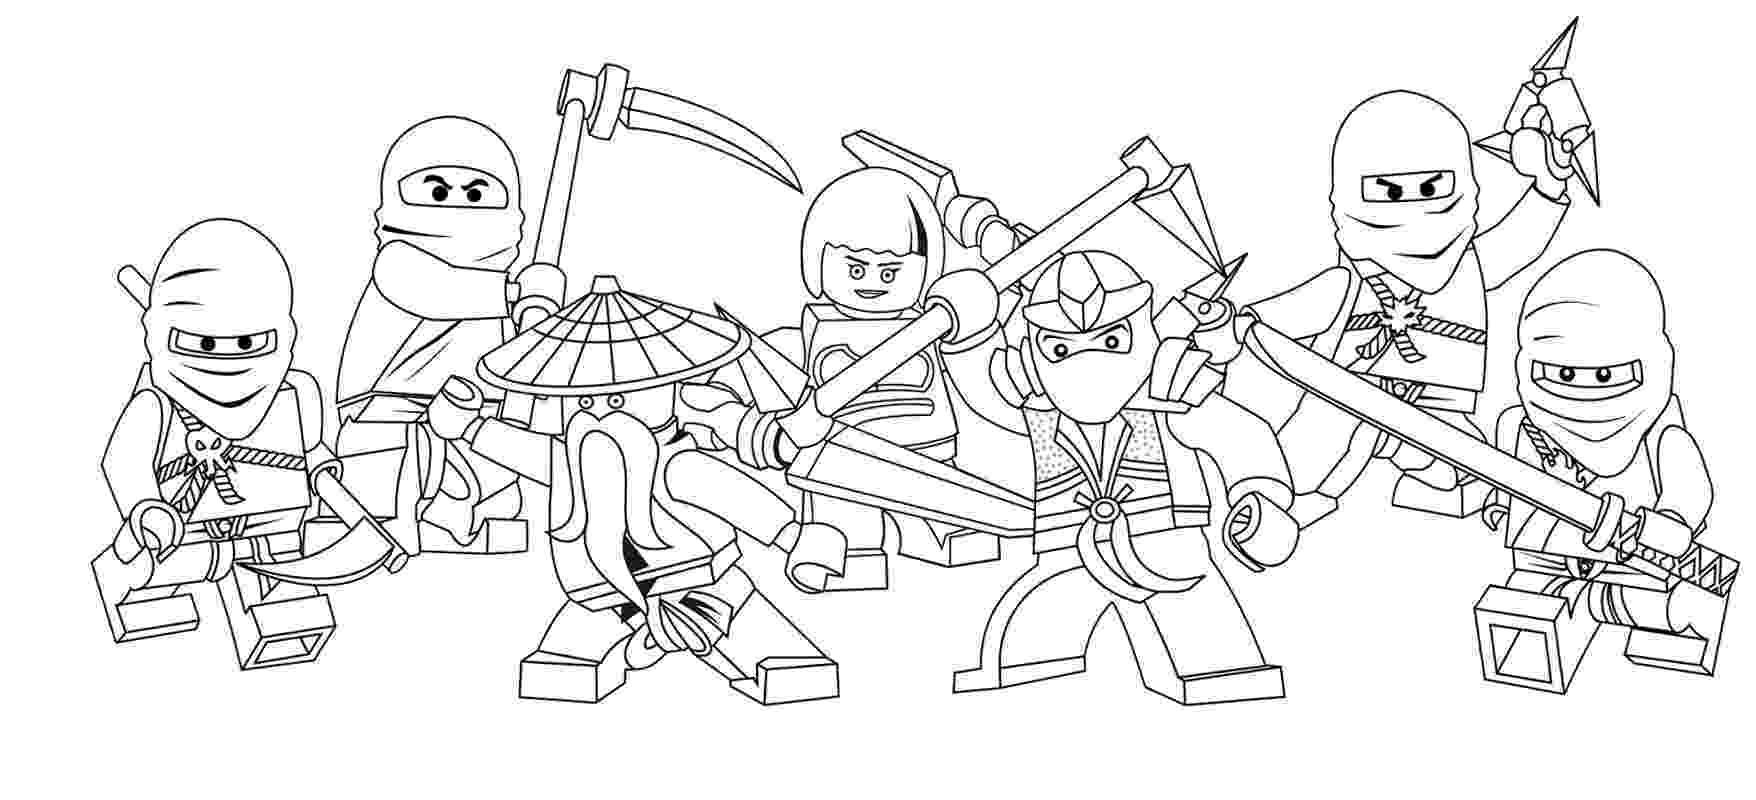 lego colouring sheet lego coloring pages getcoloringpagescom lego sheet colouring 